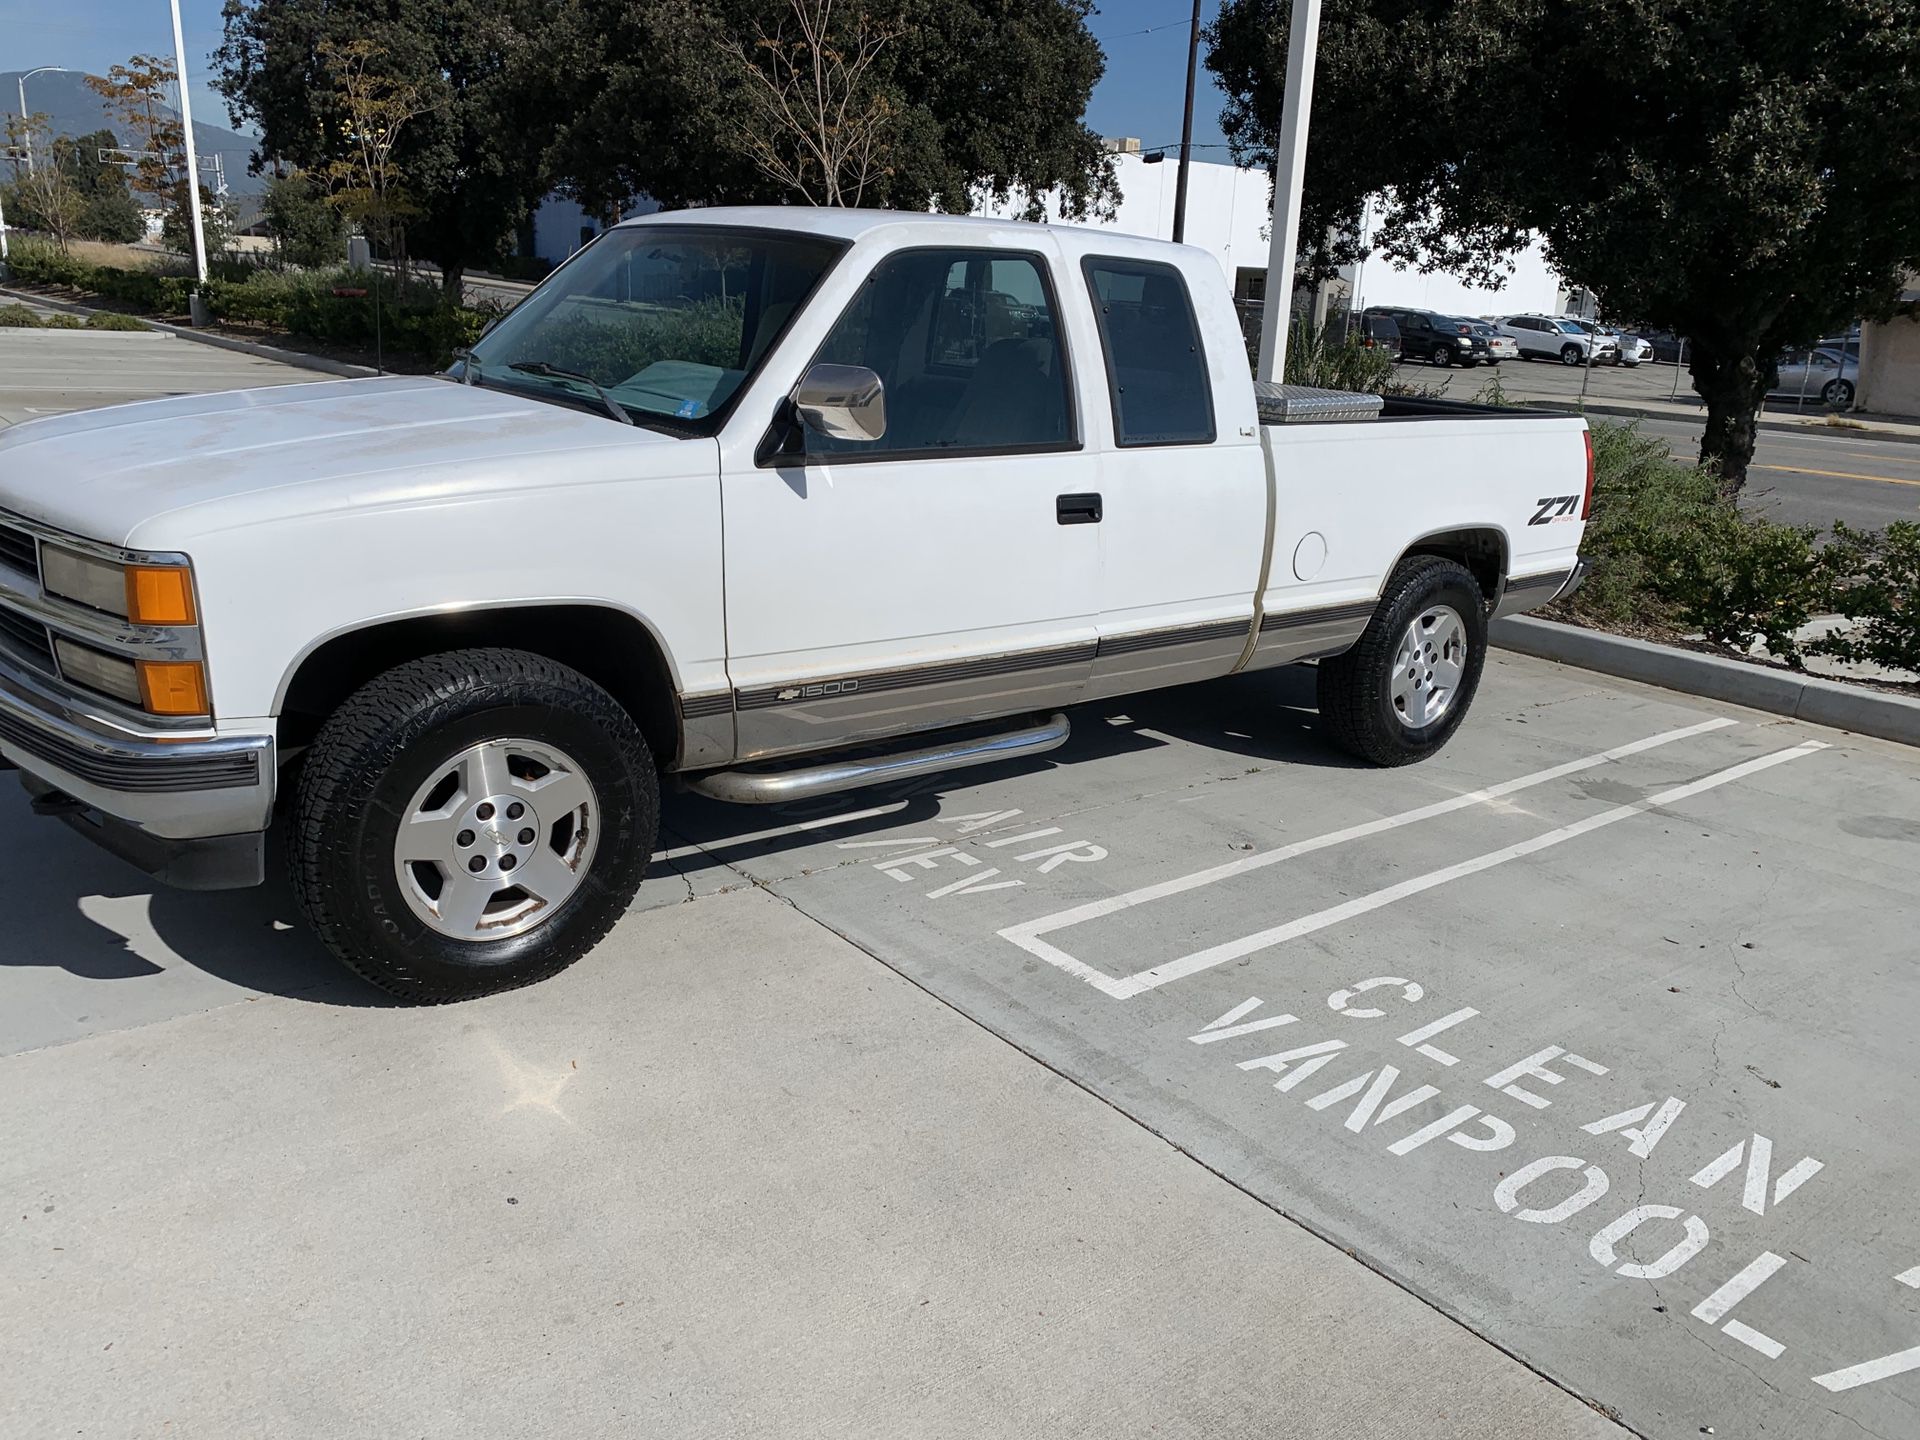 94 Chevy Silverado extended cab short bed four-wheel-drive Z 71 5.7 V8 automatic low miles 165,000 original